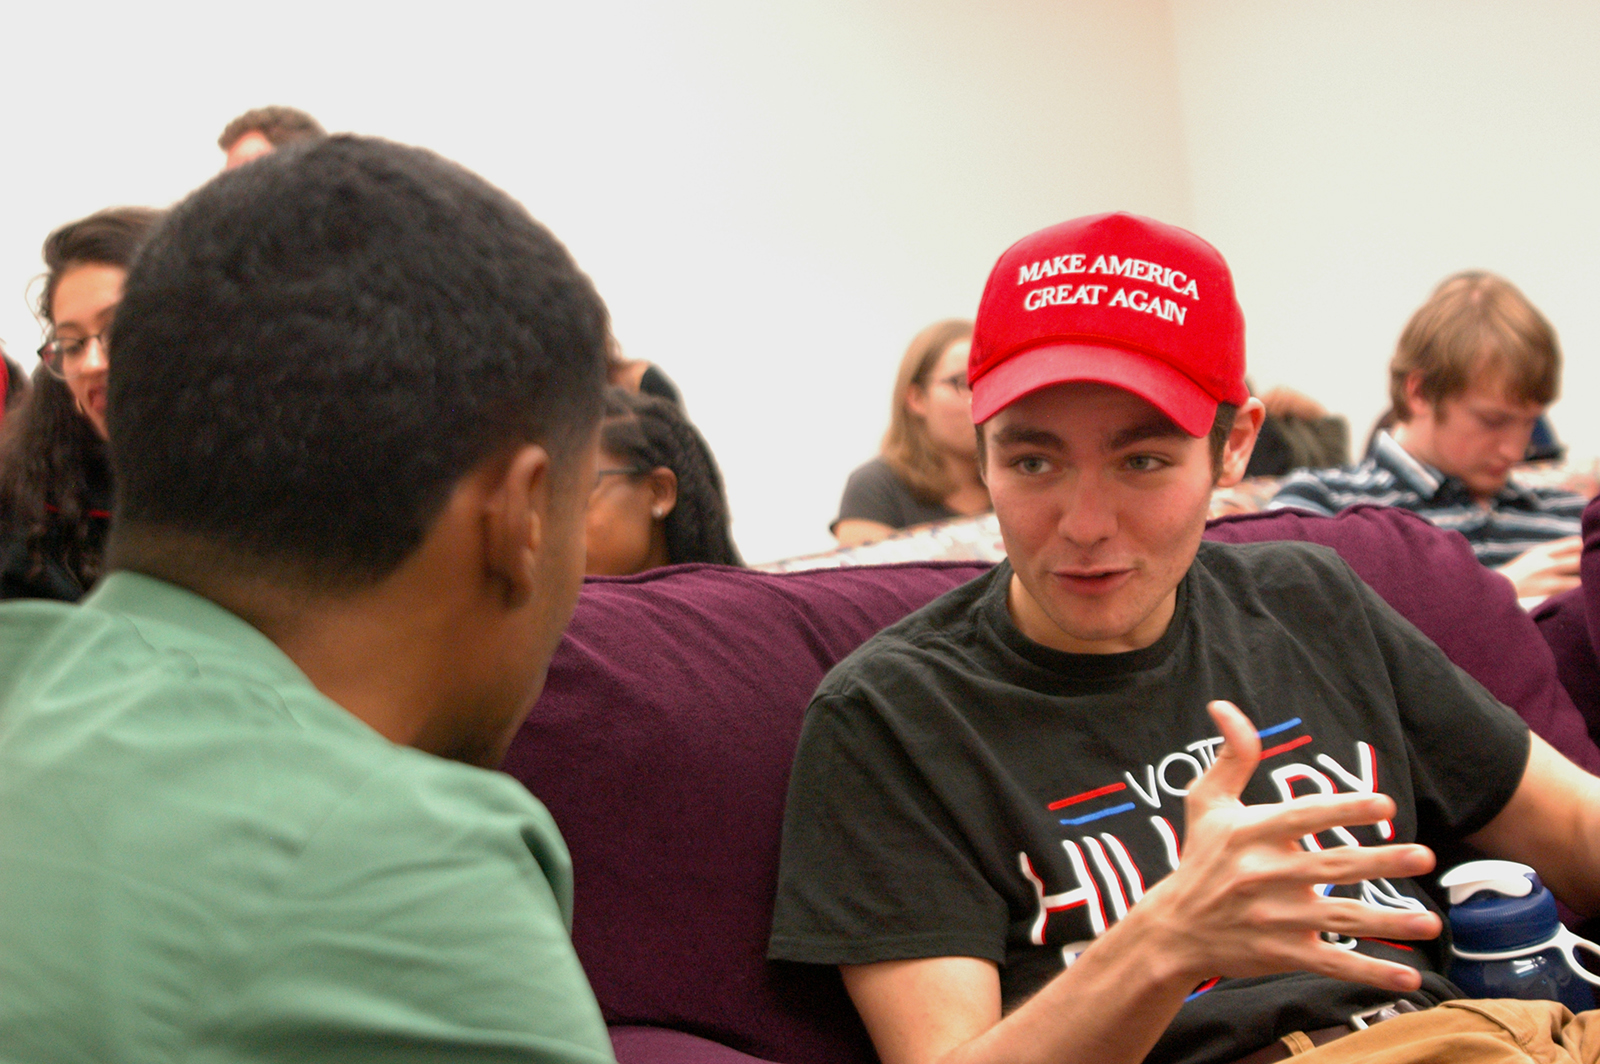 Two students exchange opinions before a viewing of the third presidential debate in the media room of 10 Buick St. Wednesday night. The debate viewing party has been a tradition for BU political science professors Dino Christenson and Douglas Kriner since 2008. PHOTO BY ALEX MASSET/ DAILY FREE PRESS STAFF